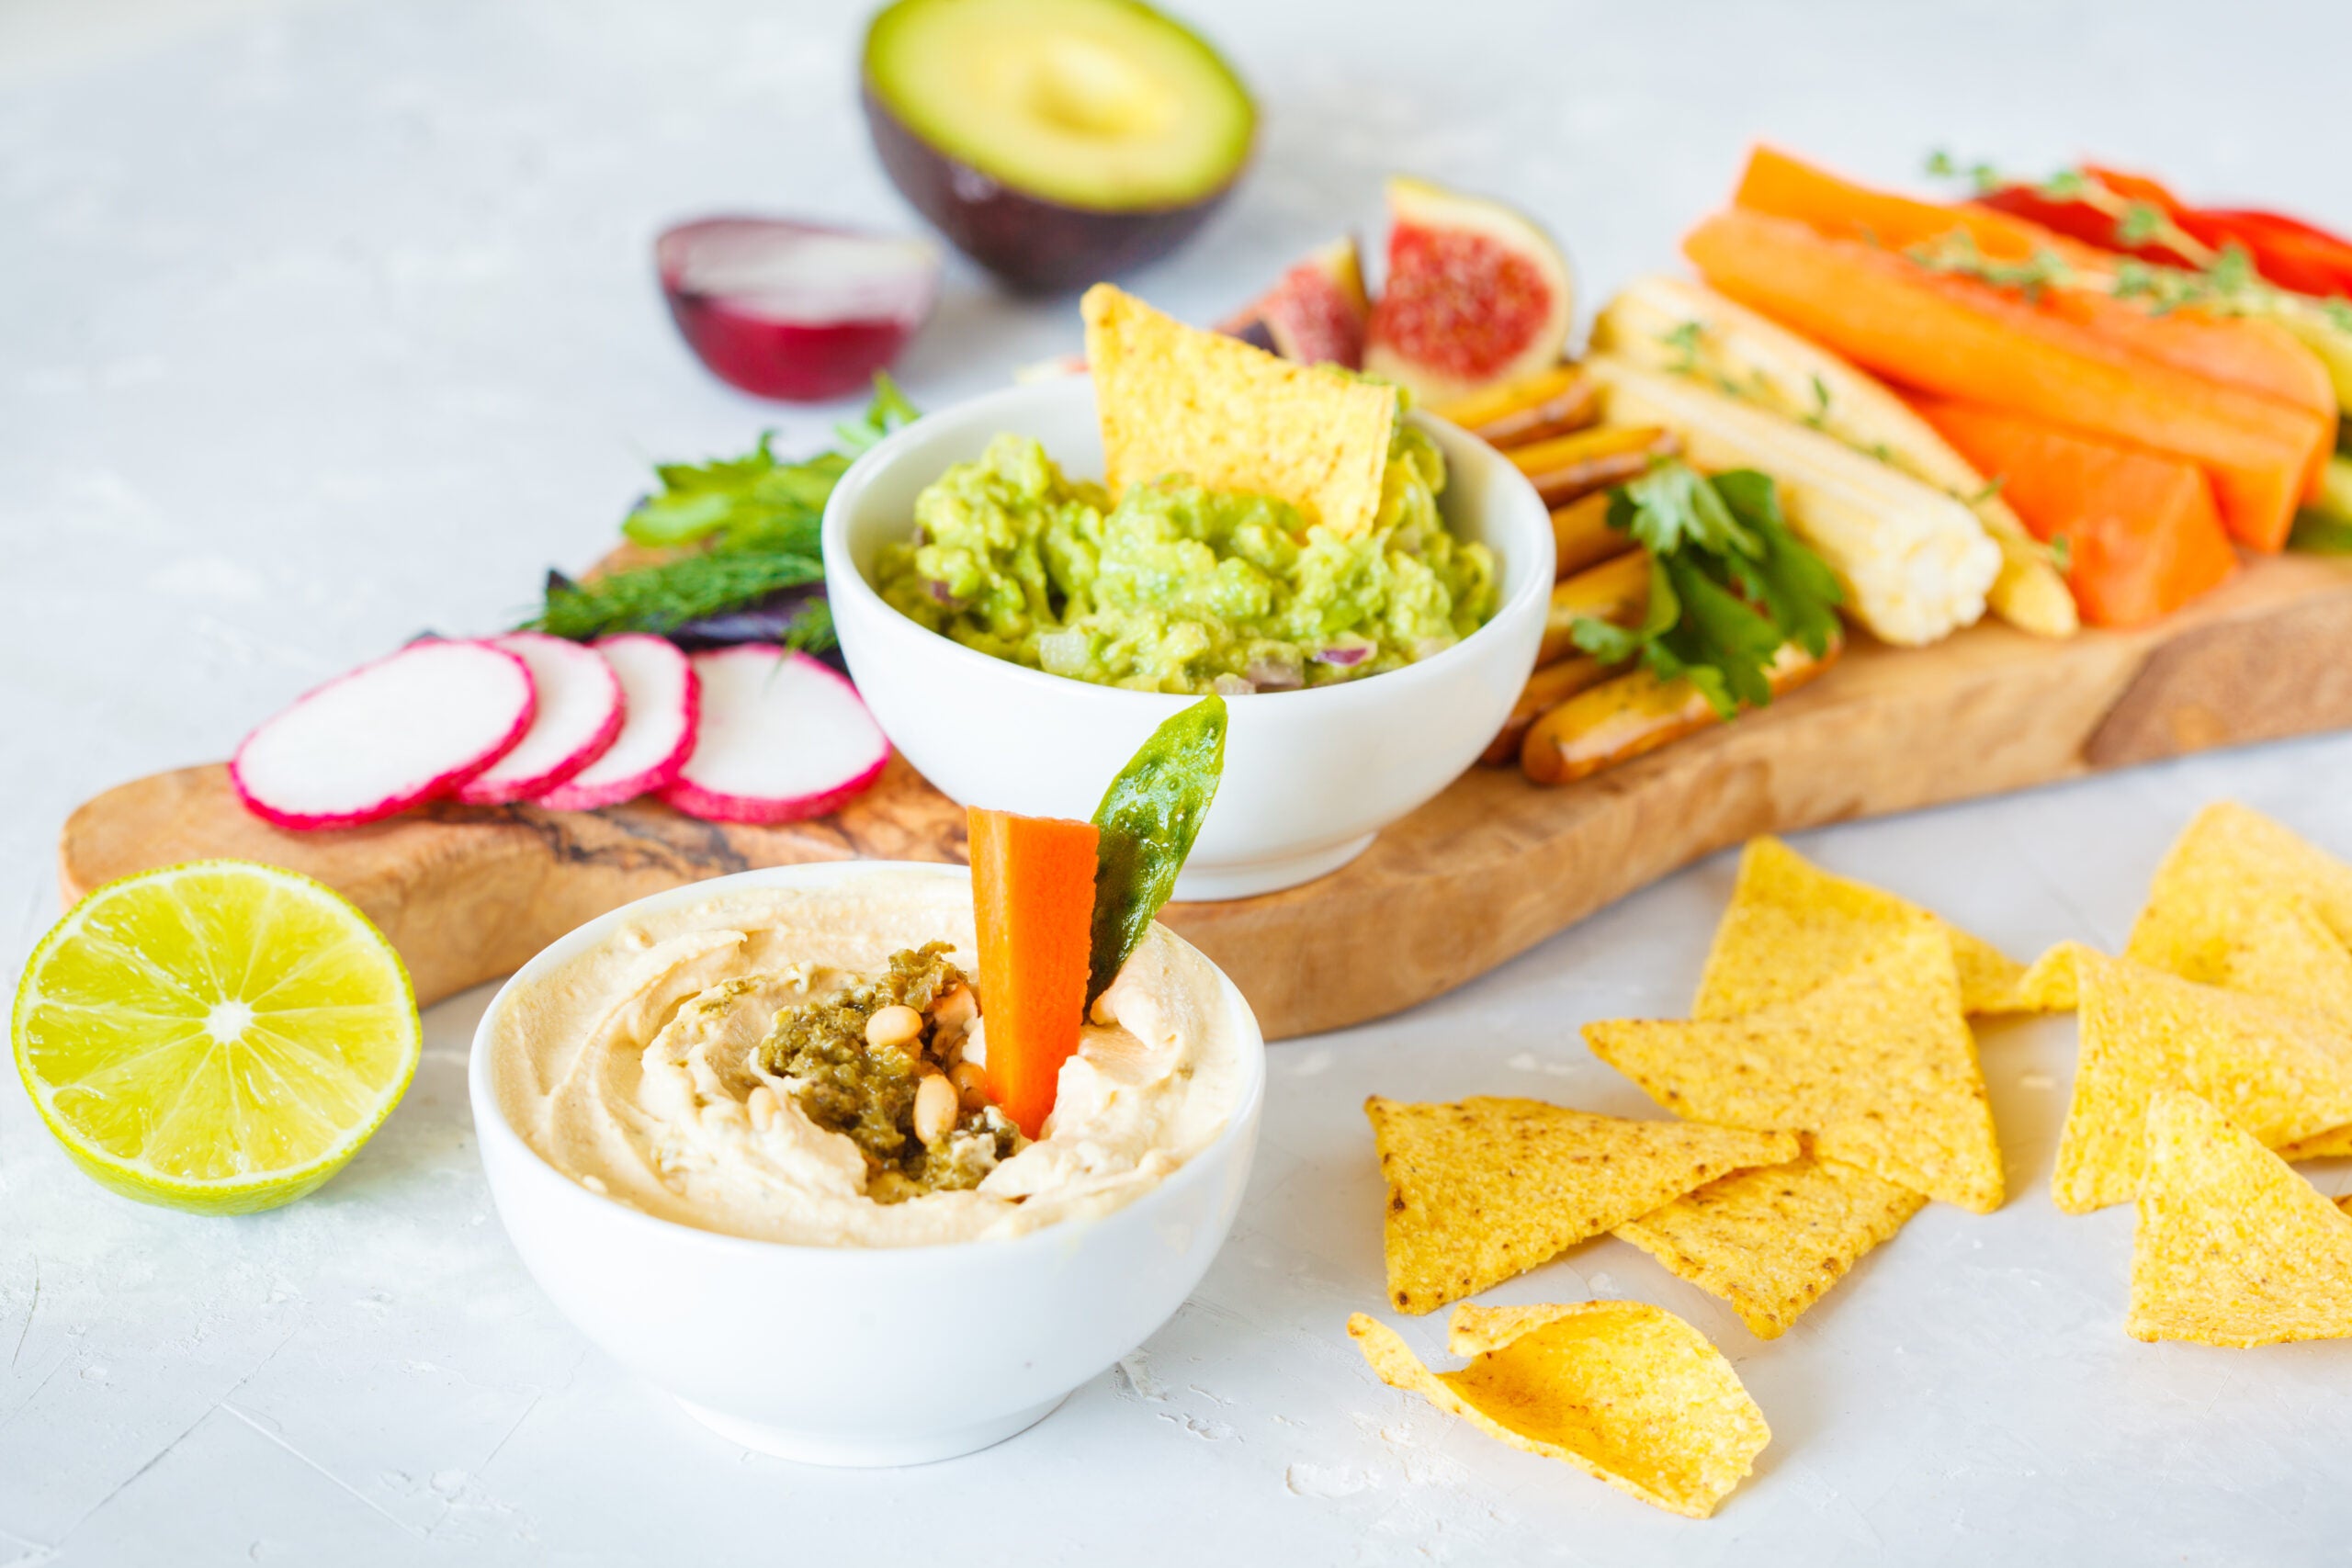 snacks arranged on a board including tortilla chips, hummus, guacamole, and a variety of sliced vegetables and fruits such as carrots, radishes, avocado, and figs